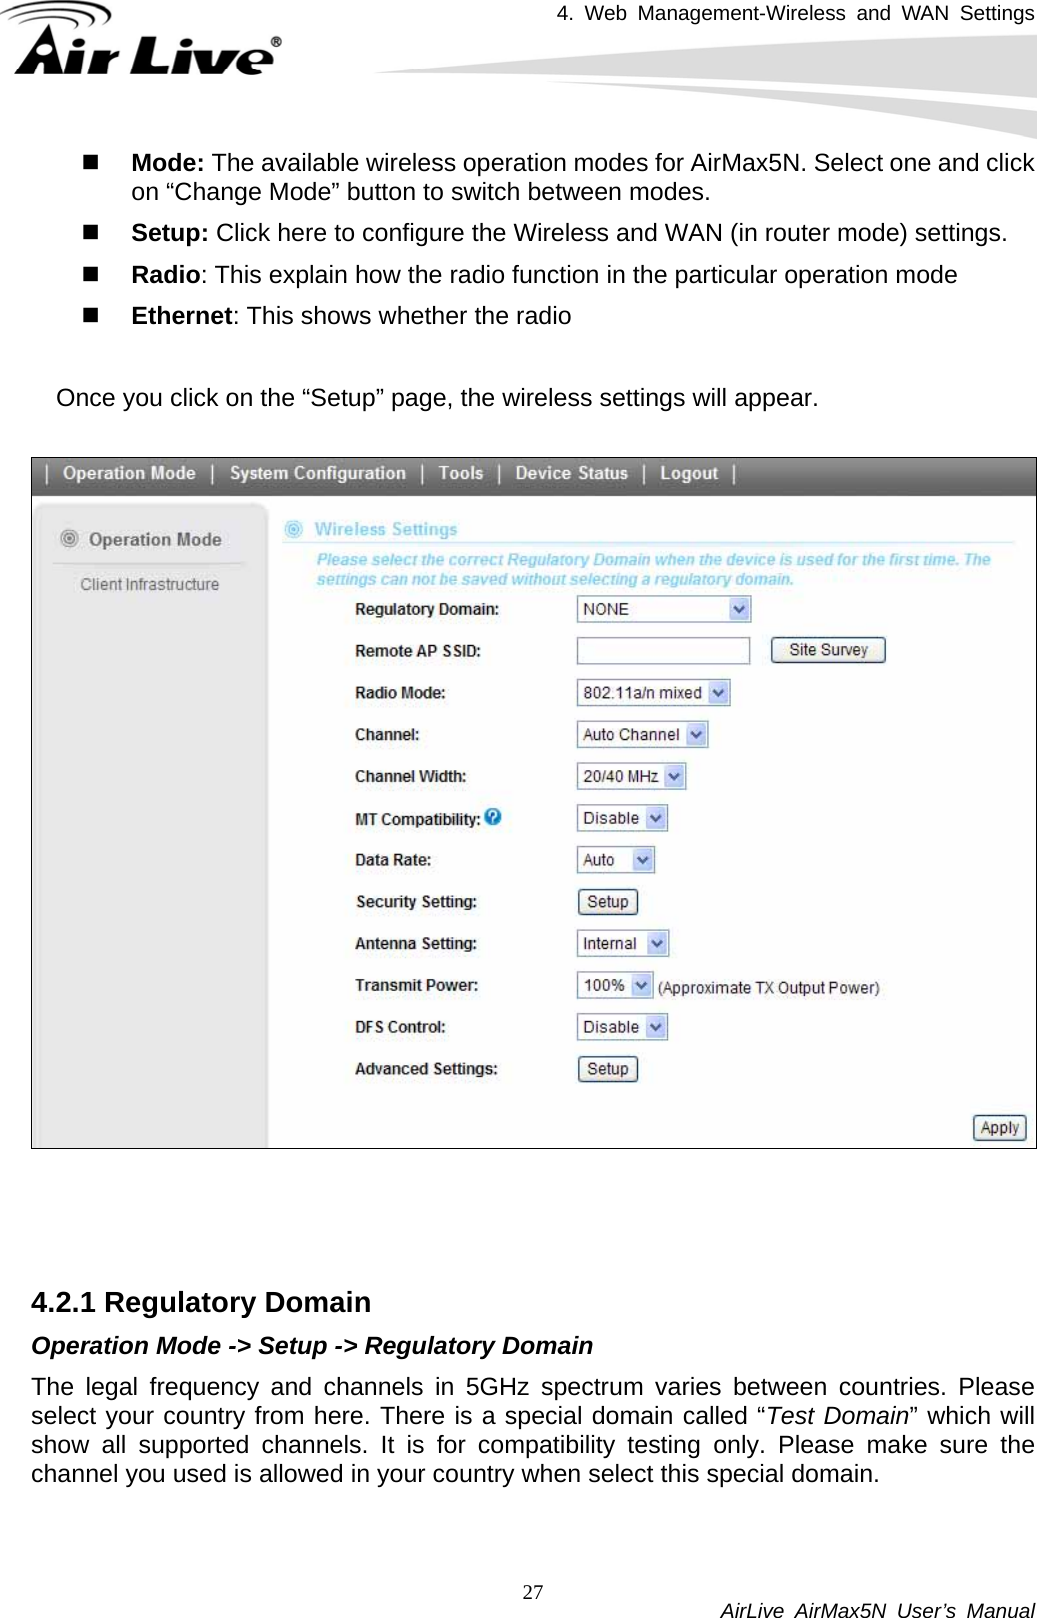 4. Web Management-Wireless and WAN Settings           AirLive AirMax5N User’s Manual 27 Mode: The available wireless operation modes for AirMax5N. Select one and click on “Change Mode” button to switch between modes.  Setup: Click here to configure the Wireless and WAN (in router mode) settings.  Radio: This explain how the radio function in the particular operation mode  Ethernet: This shows whether the radio    Once you click on the “Setup” page, the wireless settings will appear.      4.2.1 Regulatory Domain Operation Mode -&gt; Setup -&gt; Regulatory Domain The legal frequency and channels in 5GHz spectrum varies between countries. Please select your country from here. There is a special domain called “Test Domain” which will show all supported channels. It is for compatibility testing only. Please make sure the channel you used is allowed in your country when select this special domain.  